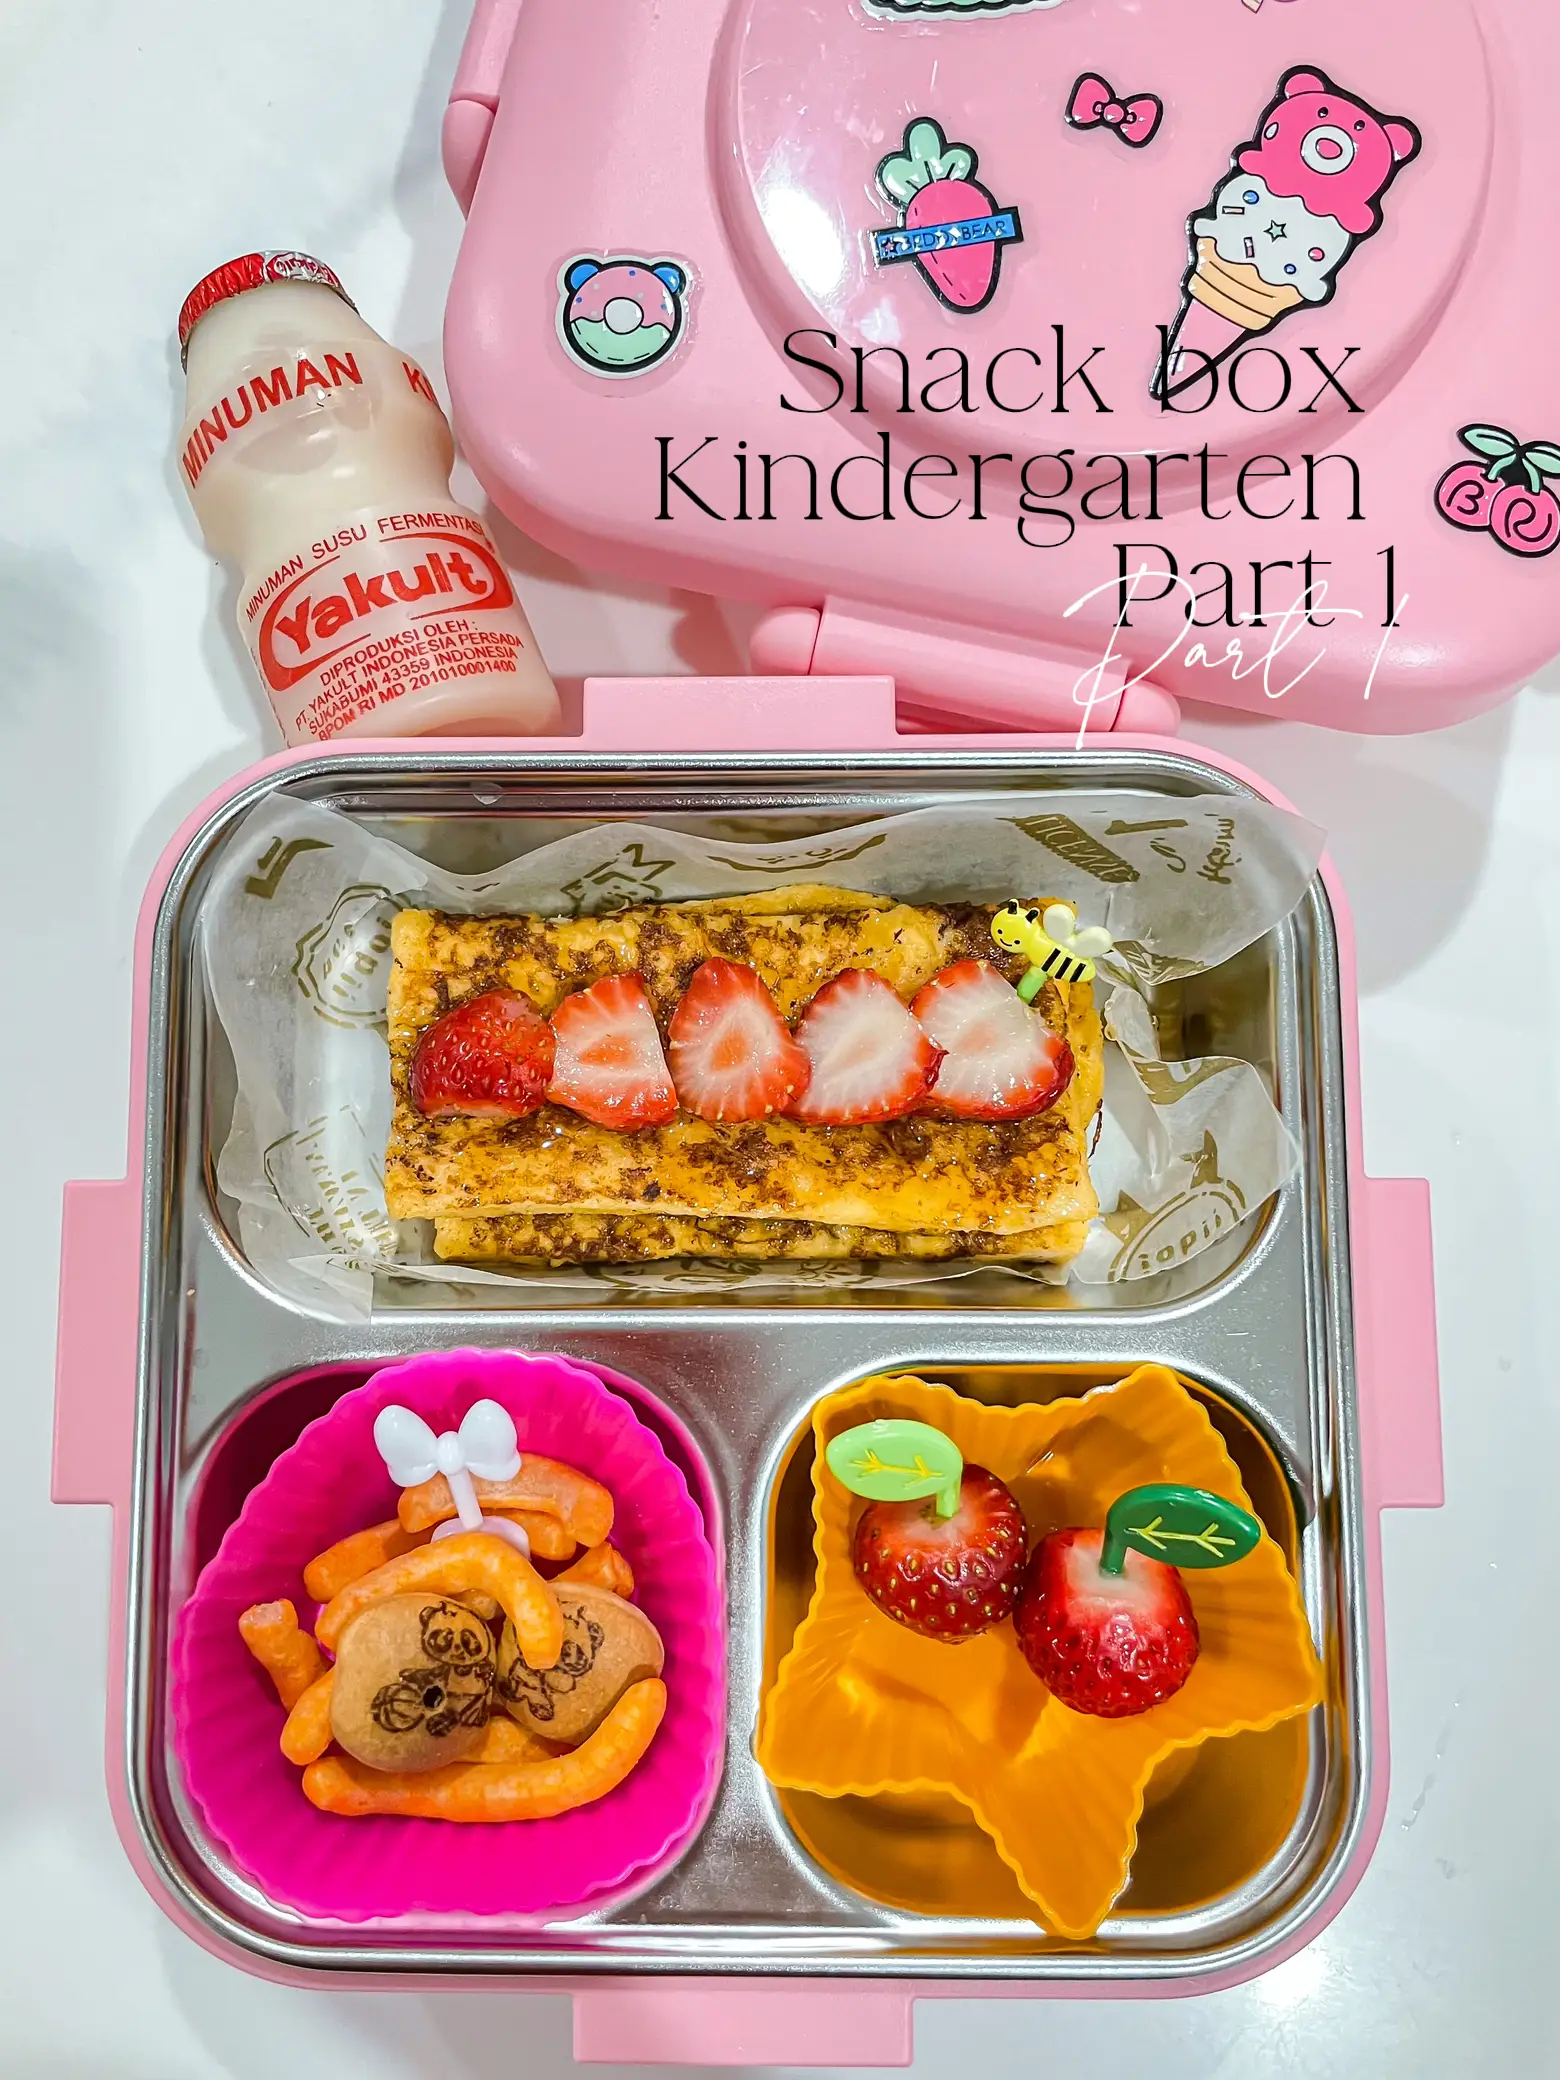 Snack box Kindergarten Part 1, Gallery posted by Siska Yap